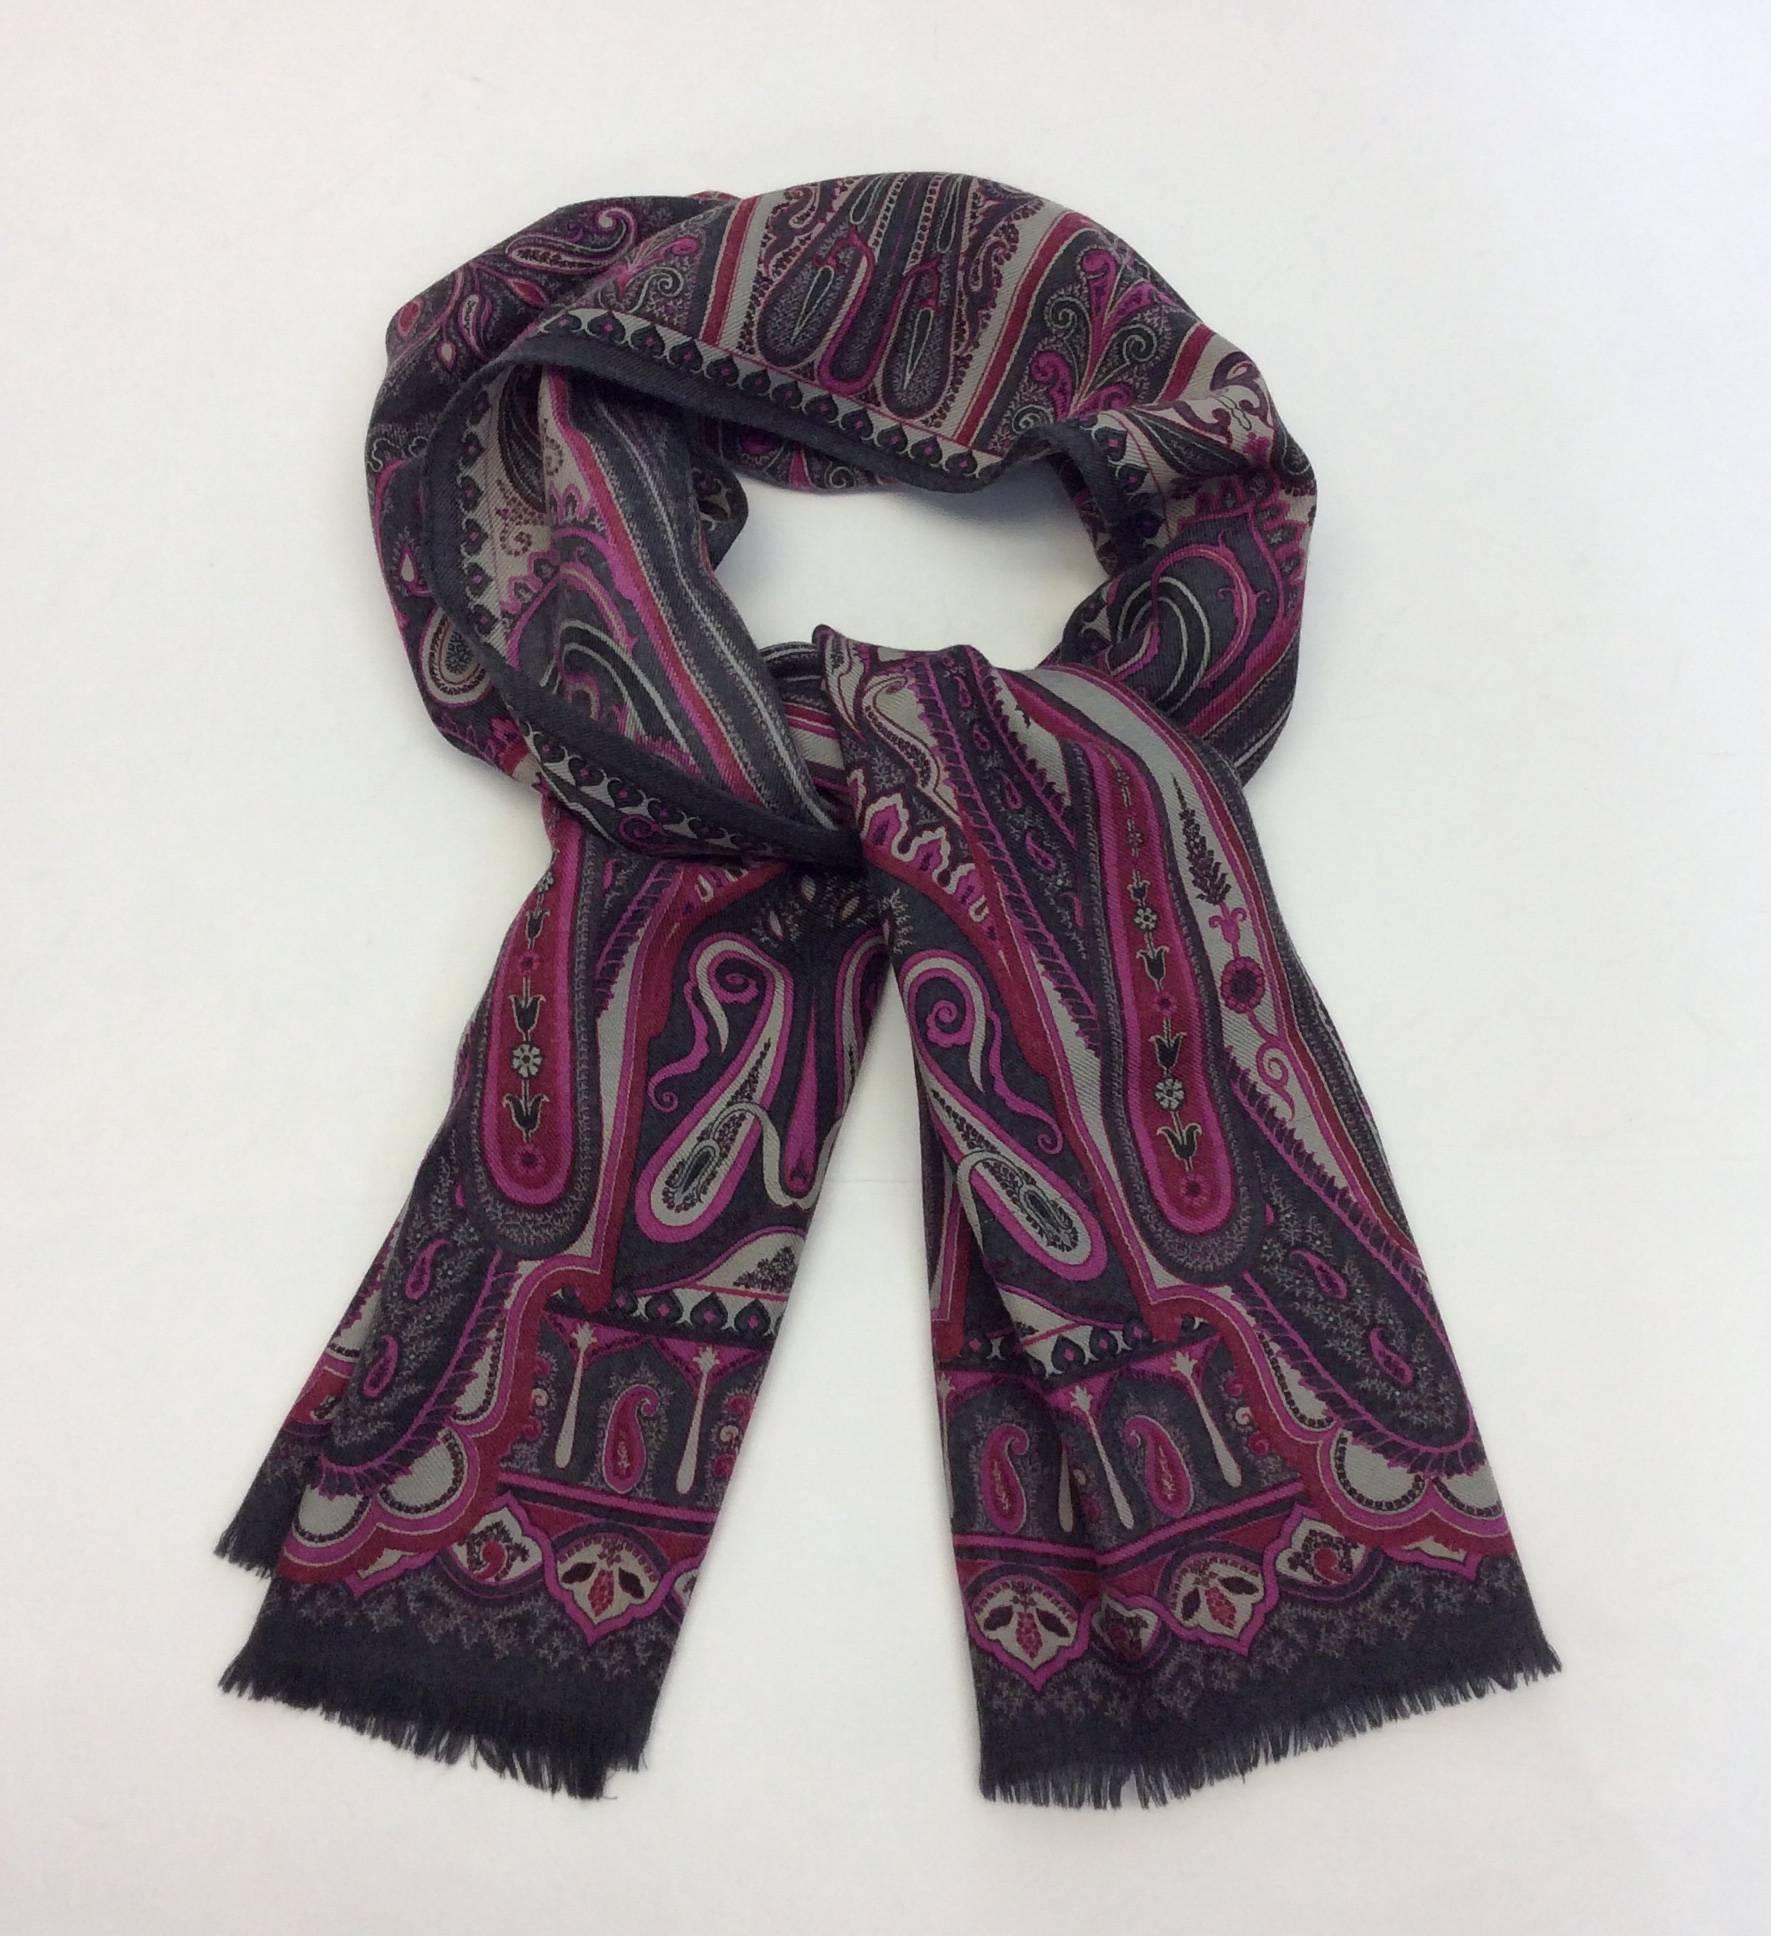  Raspberry Paisley Woven Scarf
52 inches long and 17 inches wide
Includes fringe on scarf edges
70% wool, 30% silk